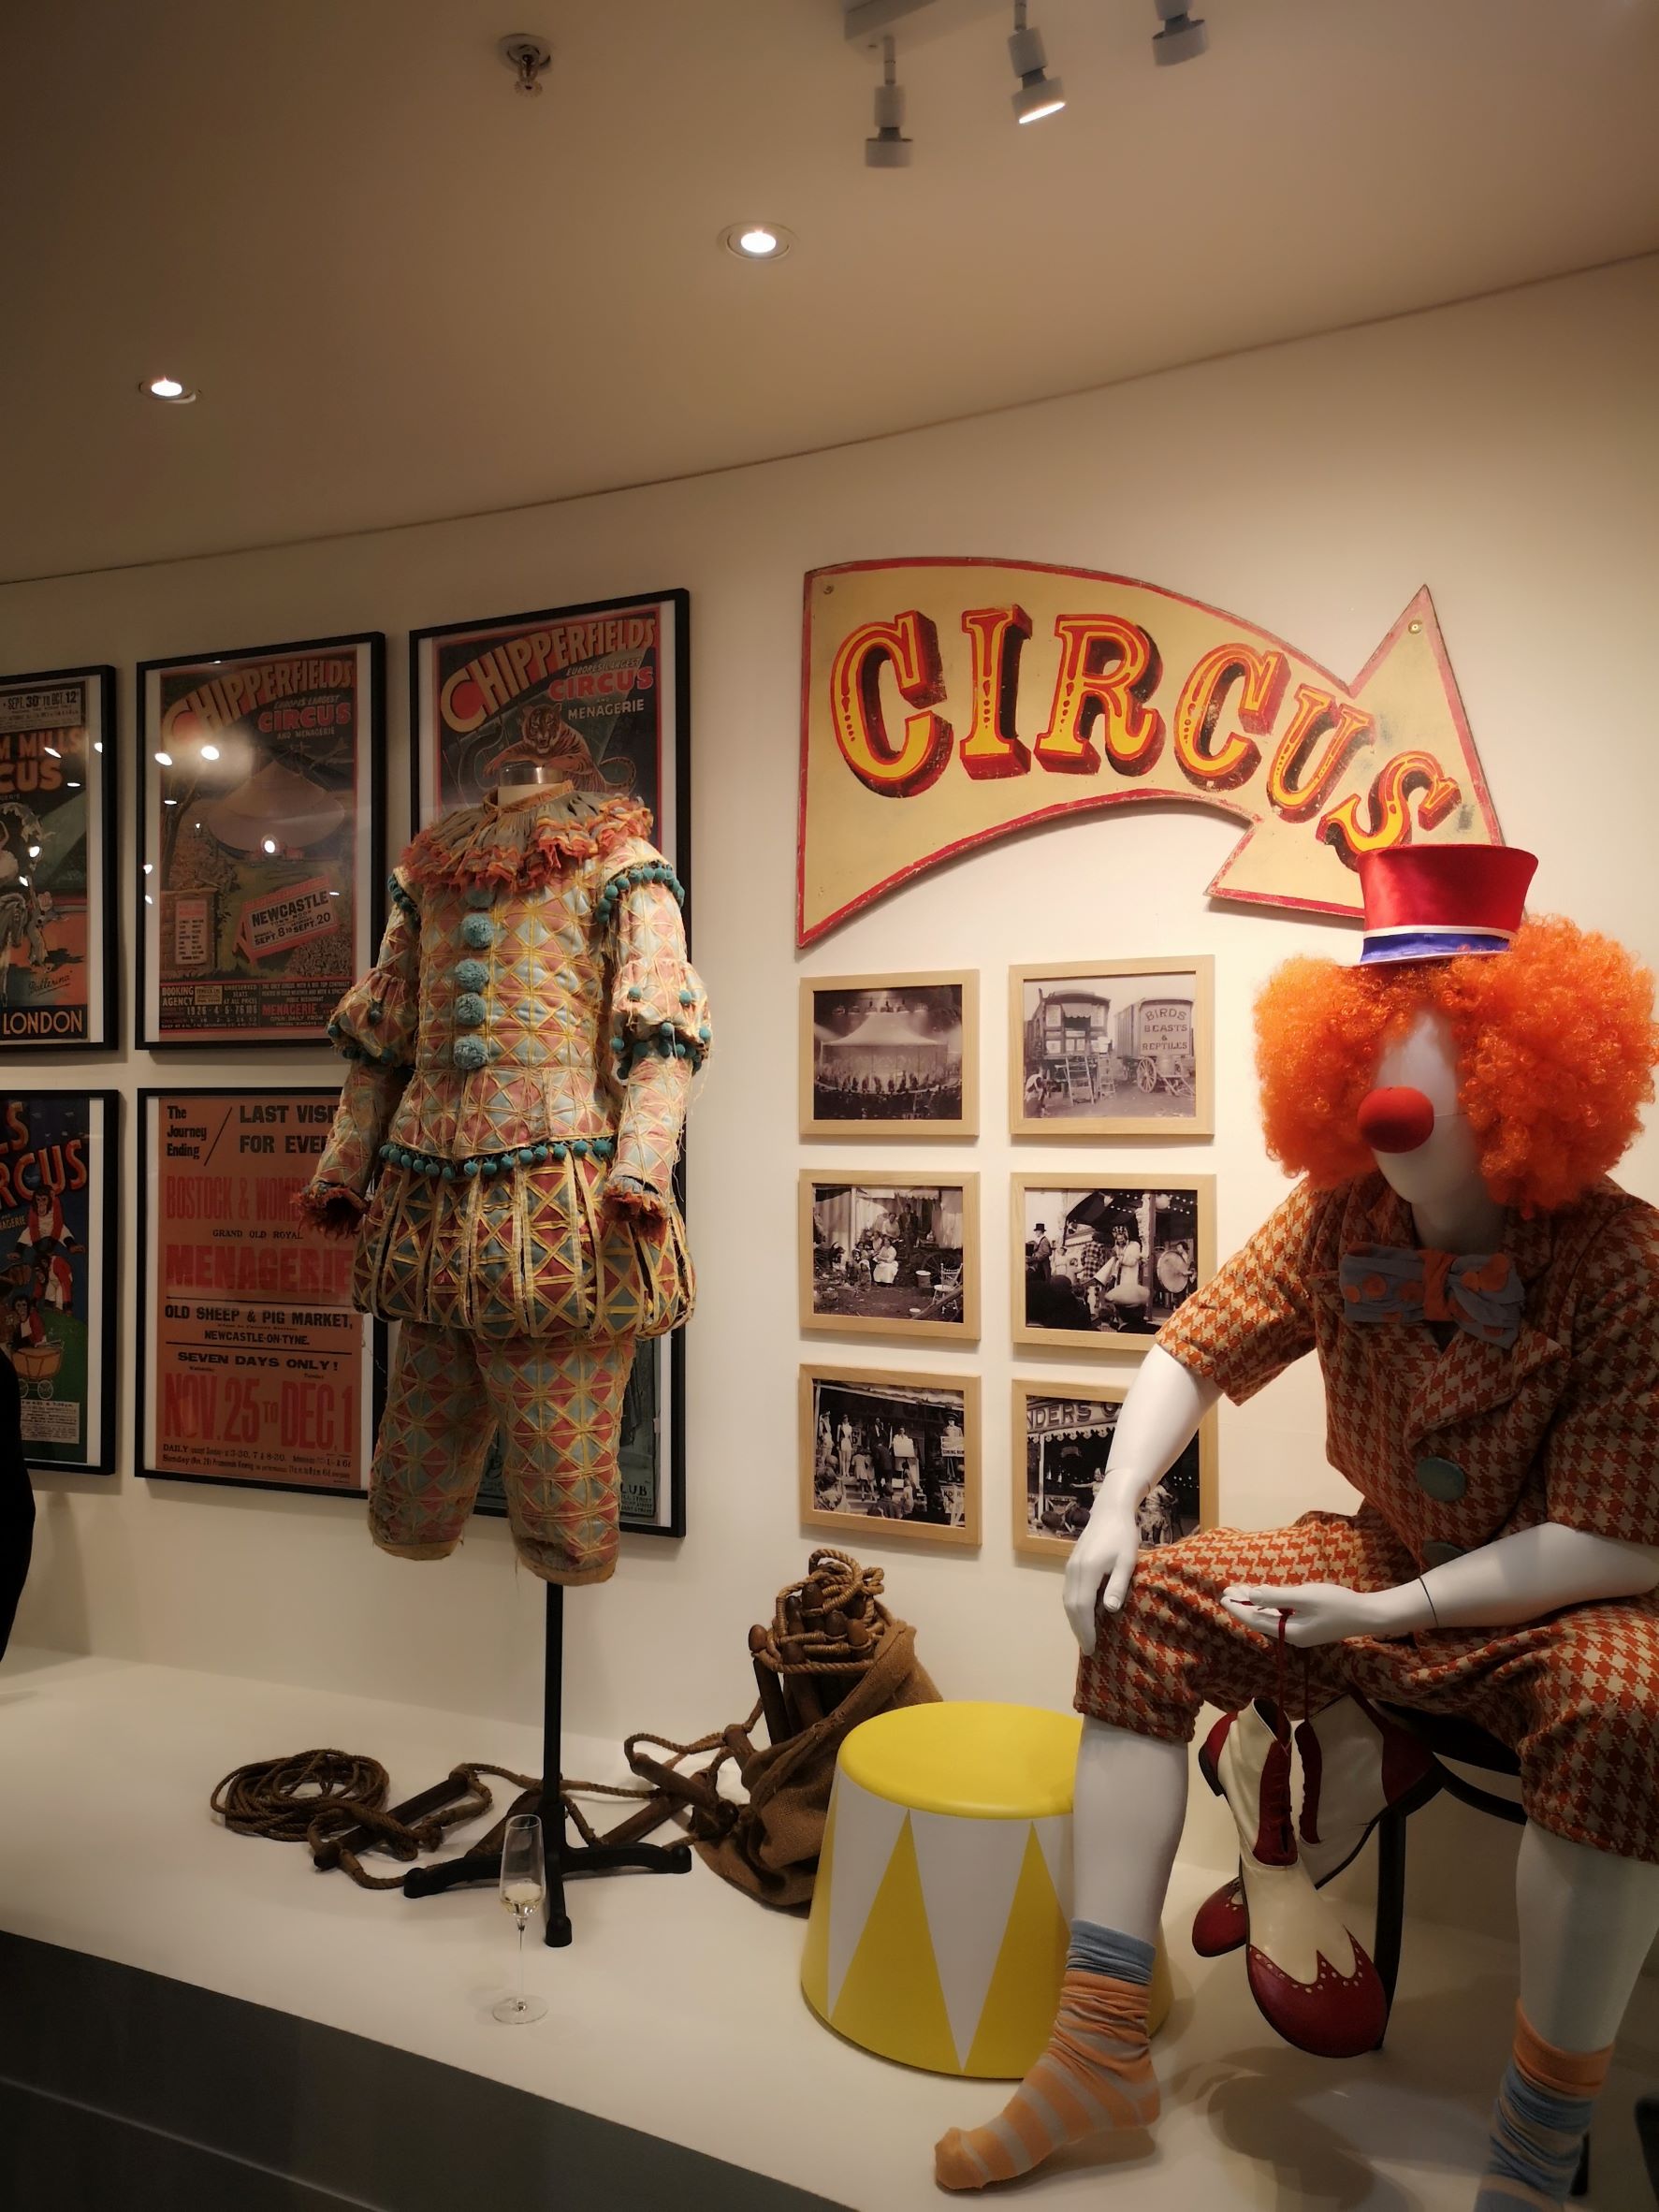 An exhibition displaying outfits and photographs from a circus